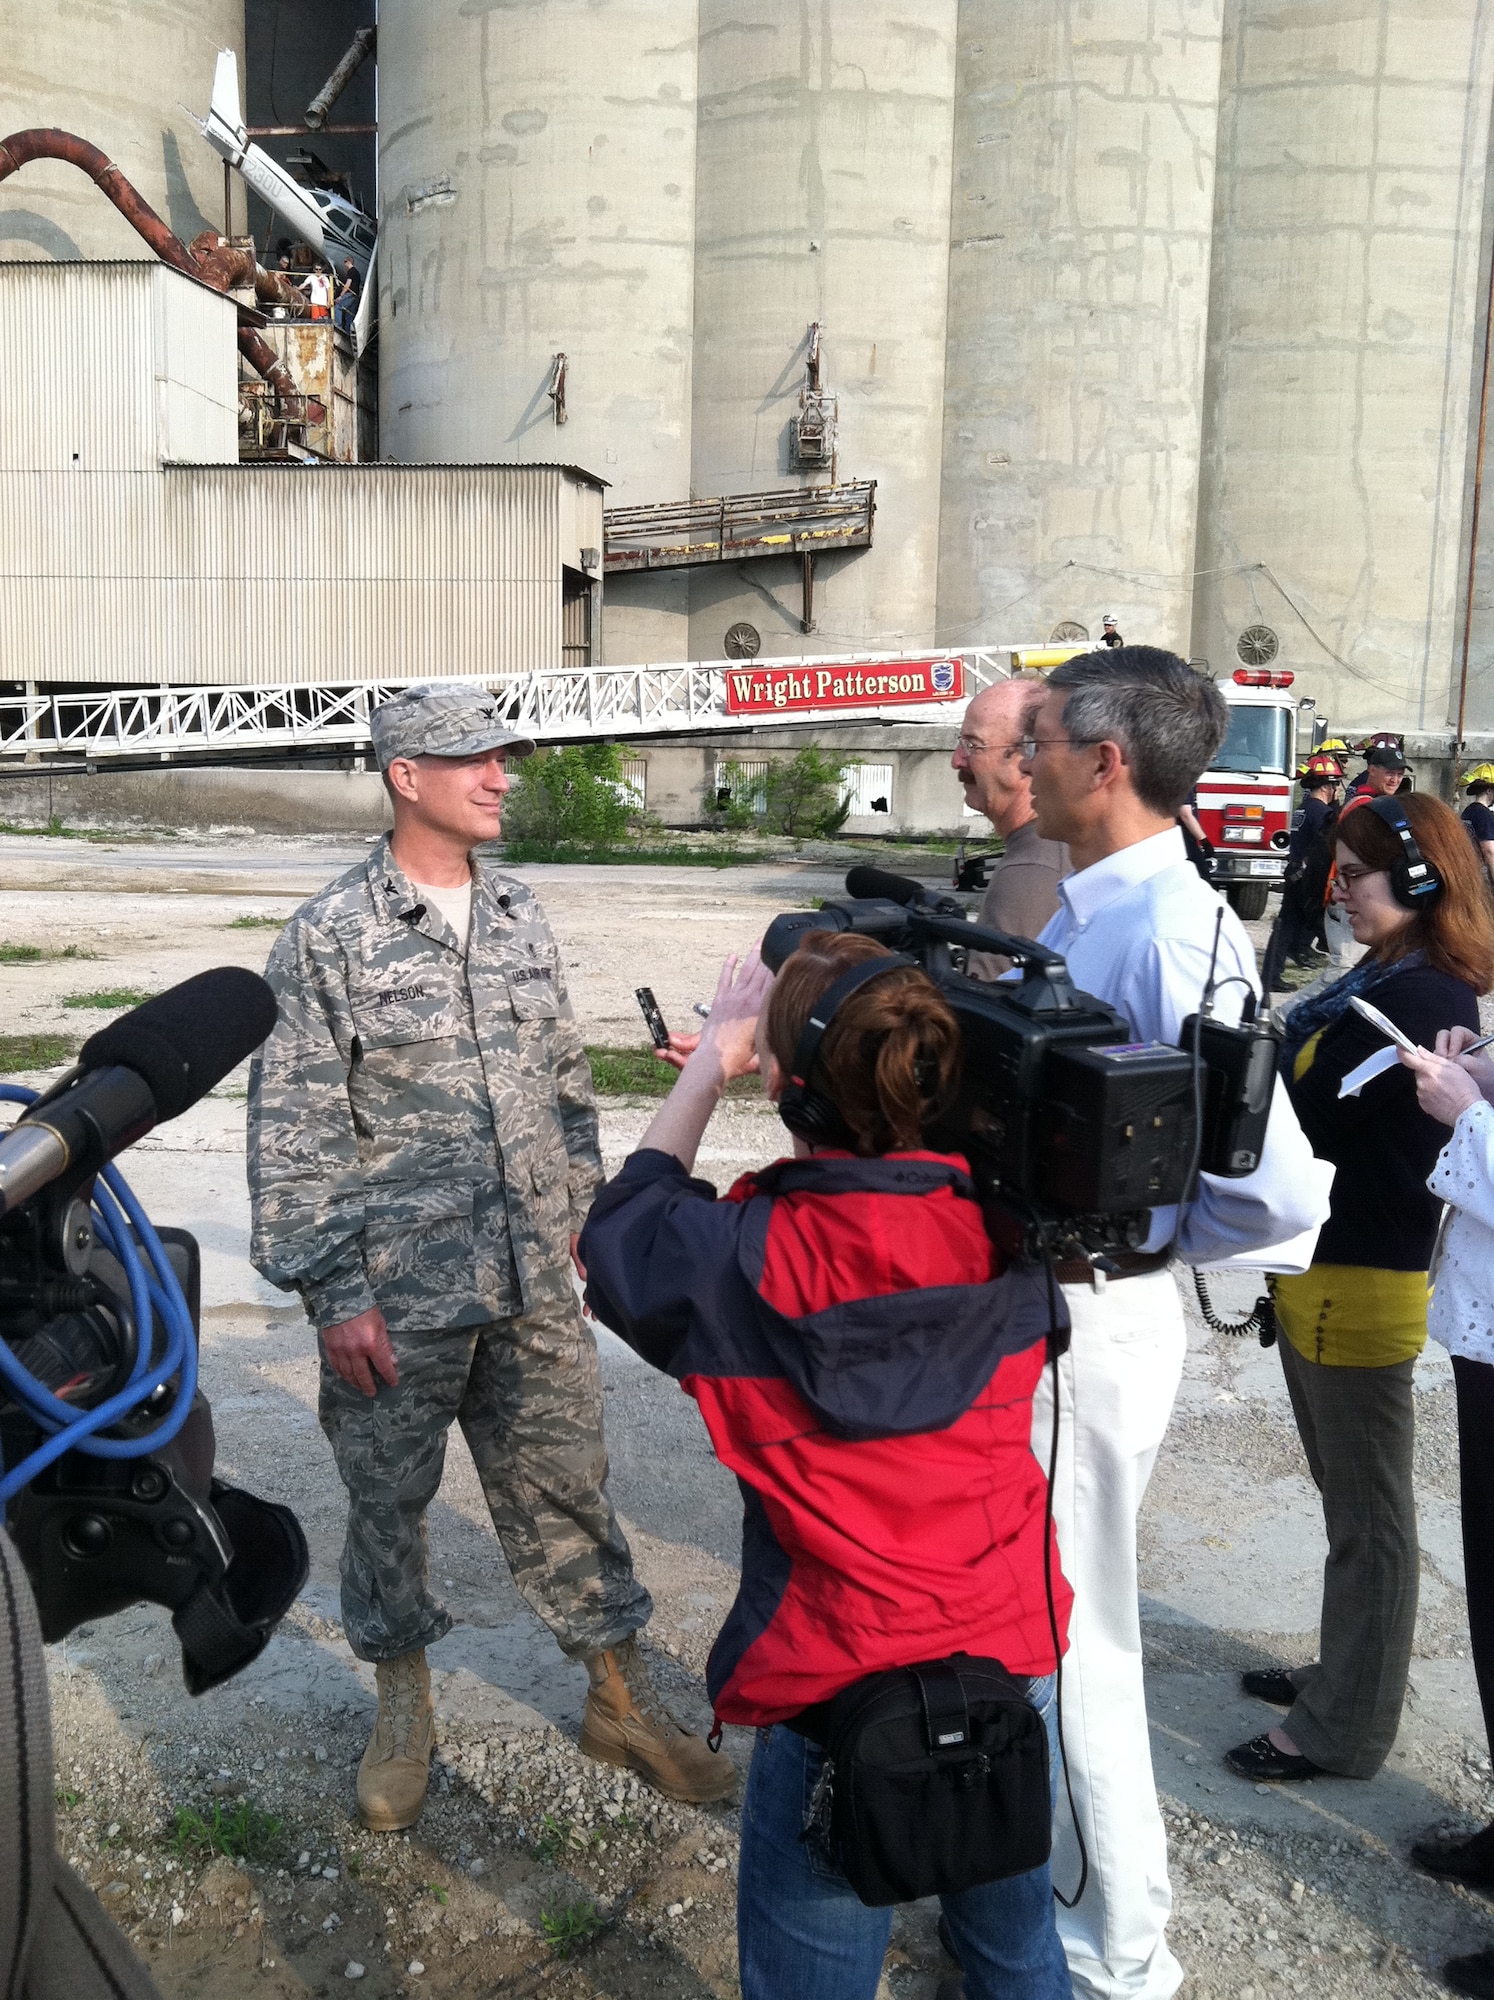 In this file photo, Col. Erik Nelson speaks to news media and public affairs representatives during a May 2011 exercise at "Calamityville," the National Center for Medical Readiness, located in Fairborn, Ohio. Air Force instructions direct only information confirmed to be accurate may be released during accidents or serious incidents. Colonel Nelson is director of medical education and training with the 88th Medical Group at Wright-Patterson Air Force Base, Ohio. (U.S. Air Force photo)